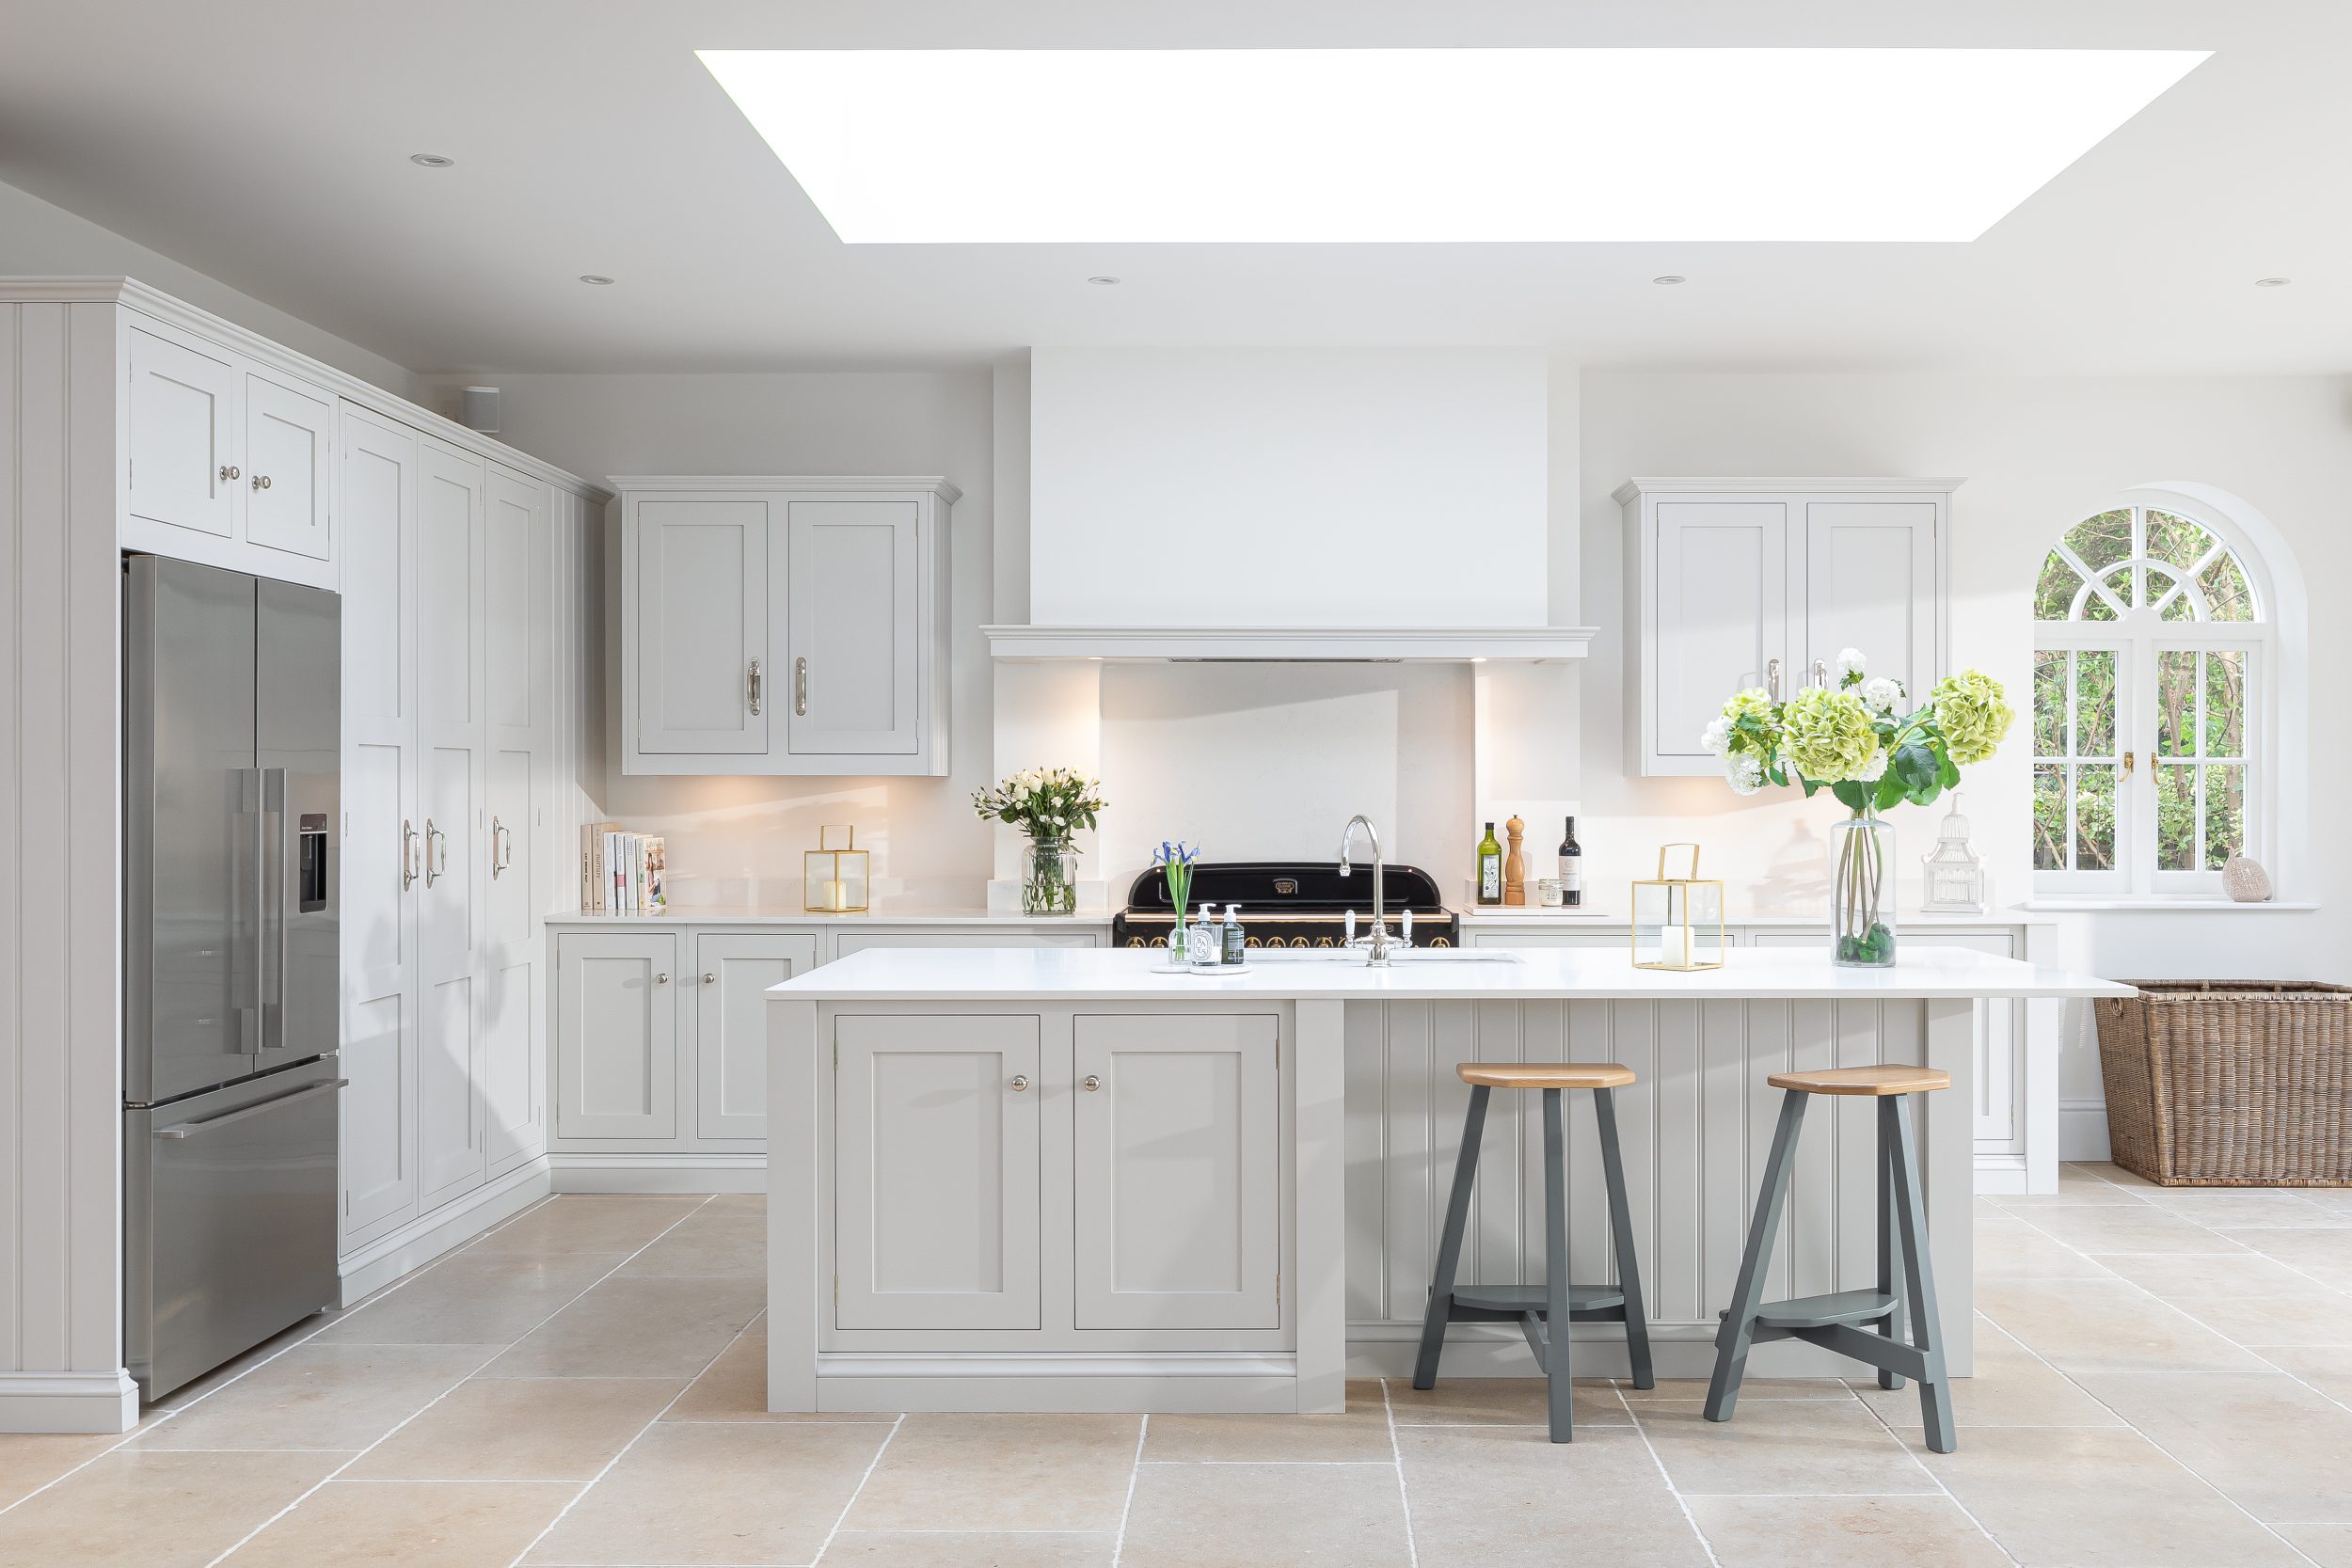 Opening Up Your Kitchen With Natural Light   John Lewis of Hungerford